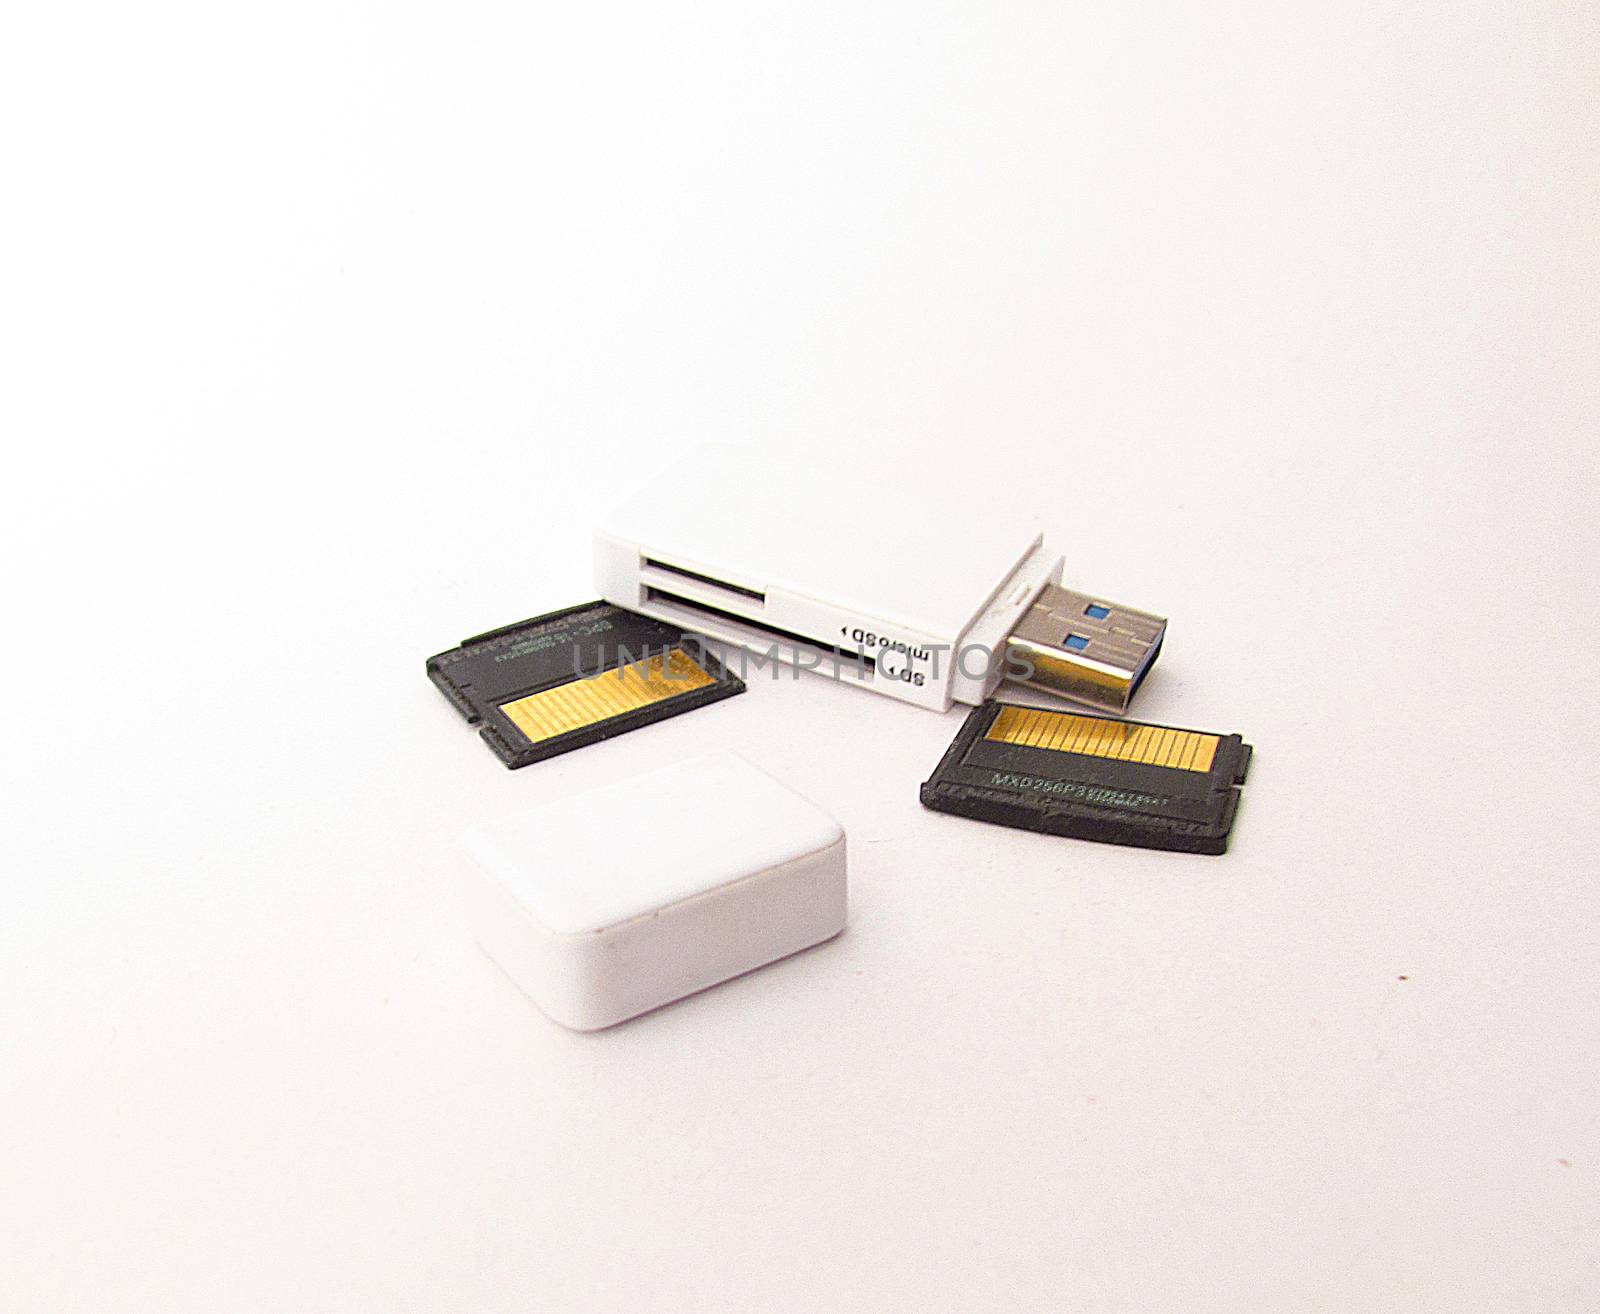 devices, carriers of digital information usb port, micro, nano, microcircuit, plastic products on a white background 